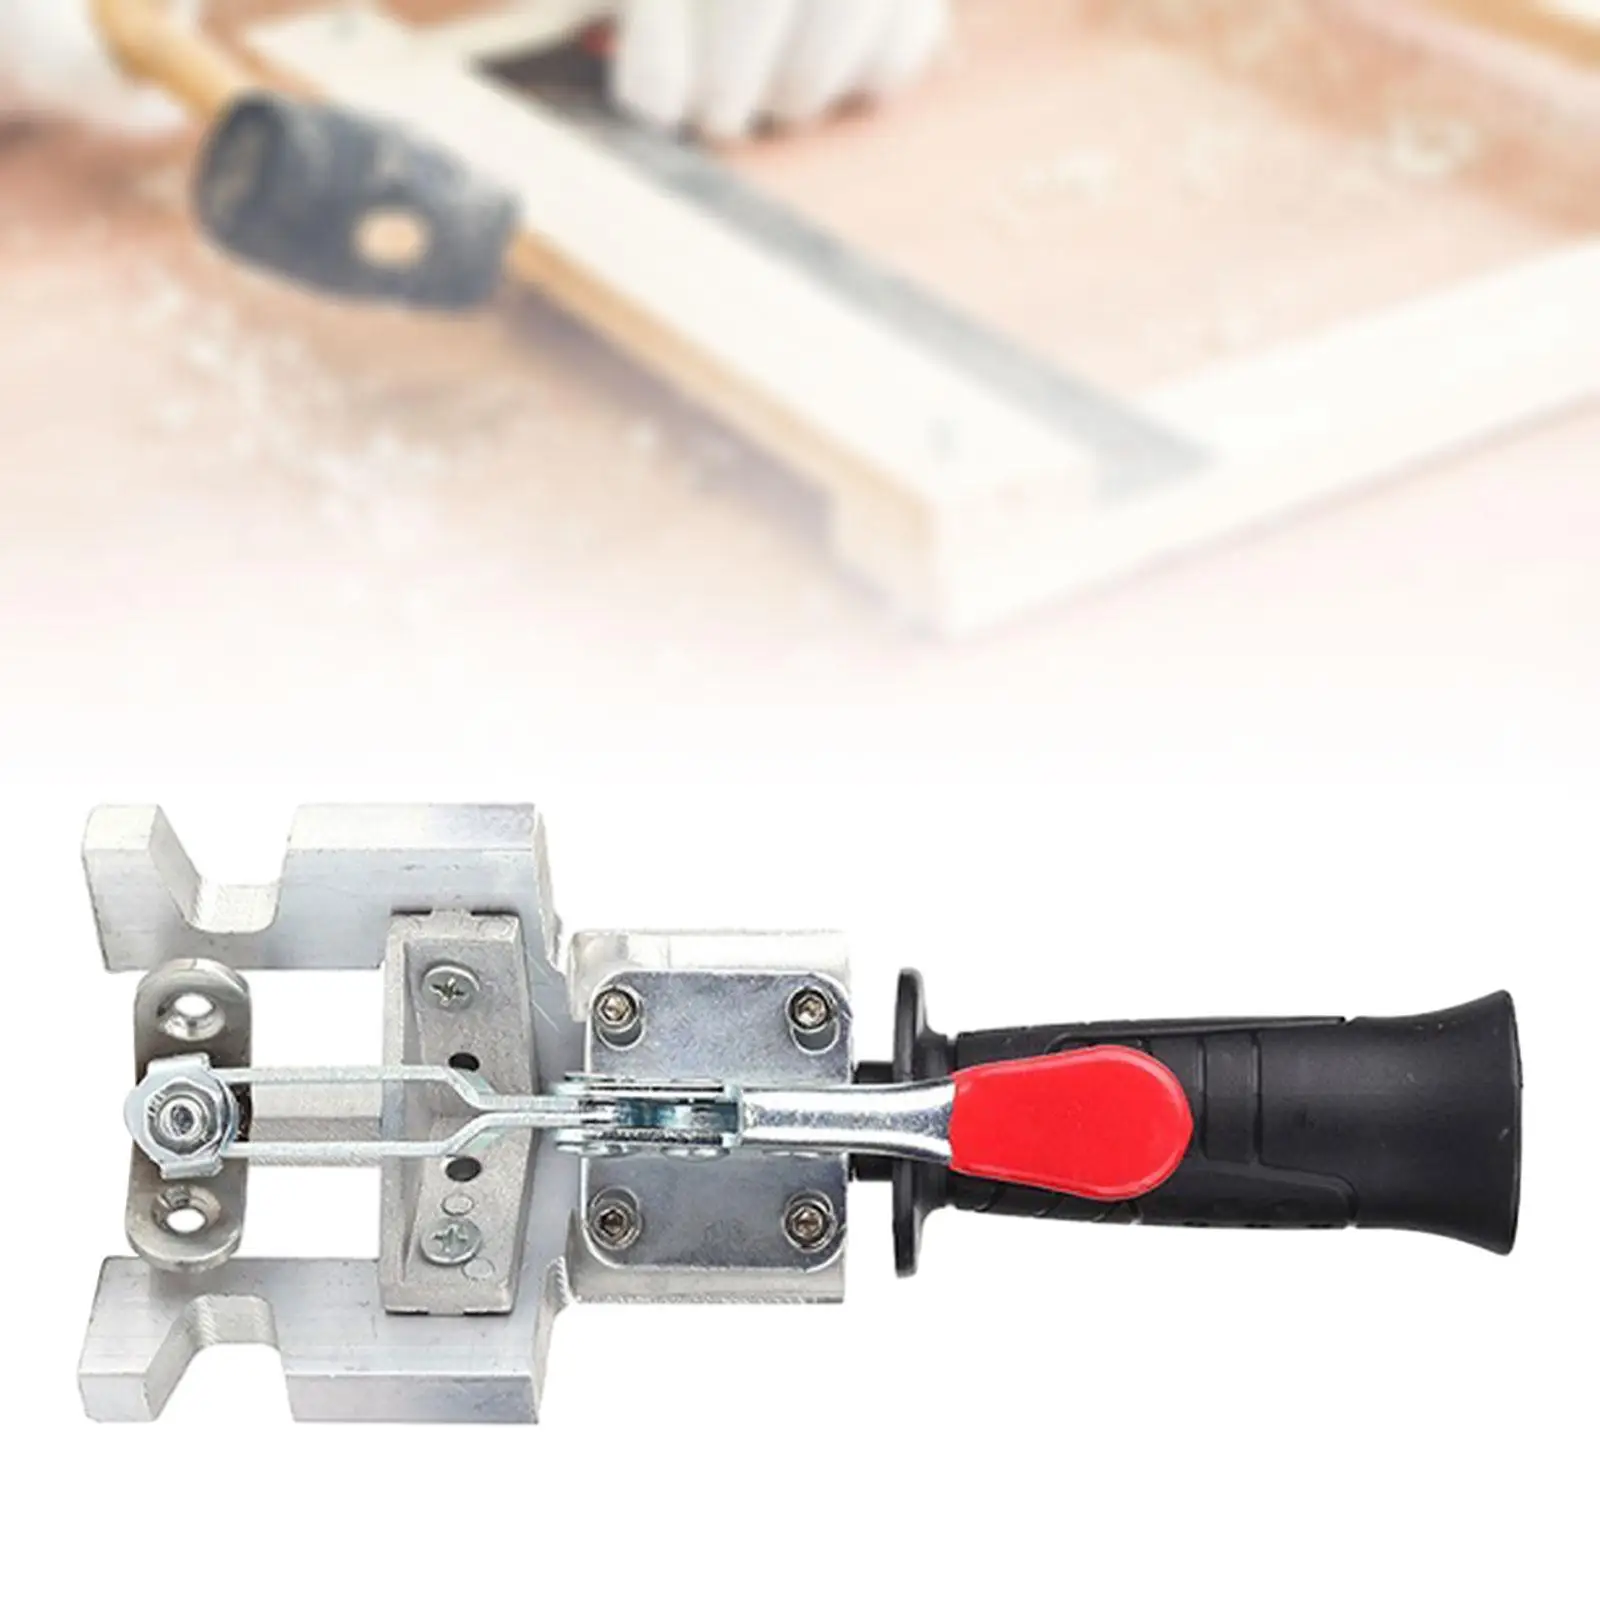 90 Degree Corner Clamps with Adjustable Swing Jaw Right Angle Clamp for Making Cabinets Doweling Welding Framing Woodworking